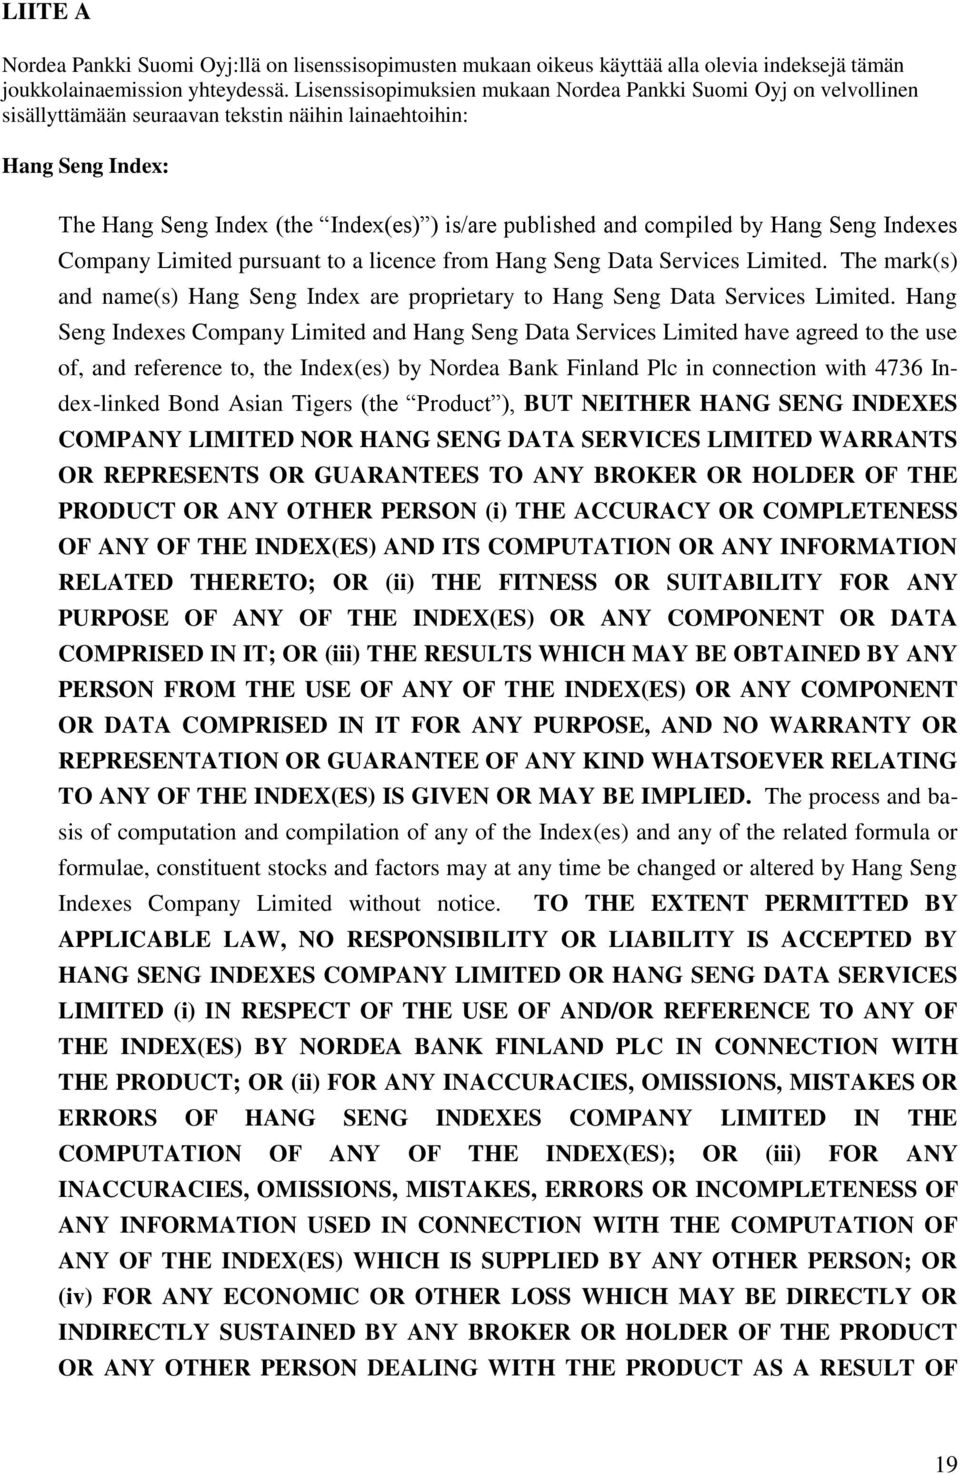 compiled by Hang Seng Indexes Company Limited pursuant to a licence from Hang Seng Data Services Limited. The mark(s) and name(s) Hang Seng Index are proprietary to Hang Seng Data Services Limited.